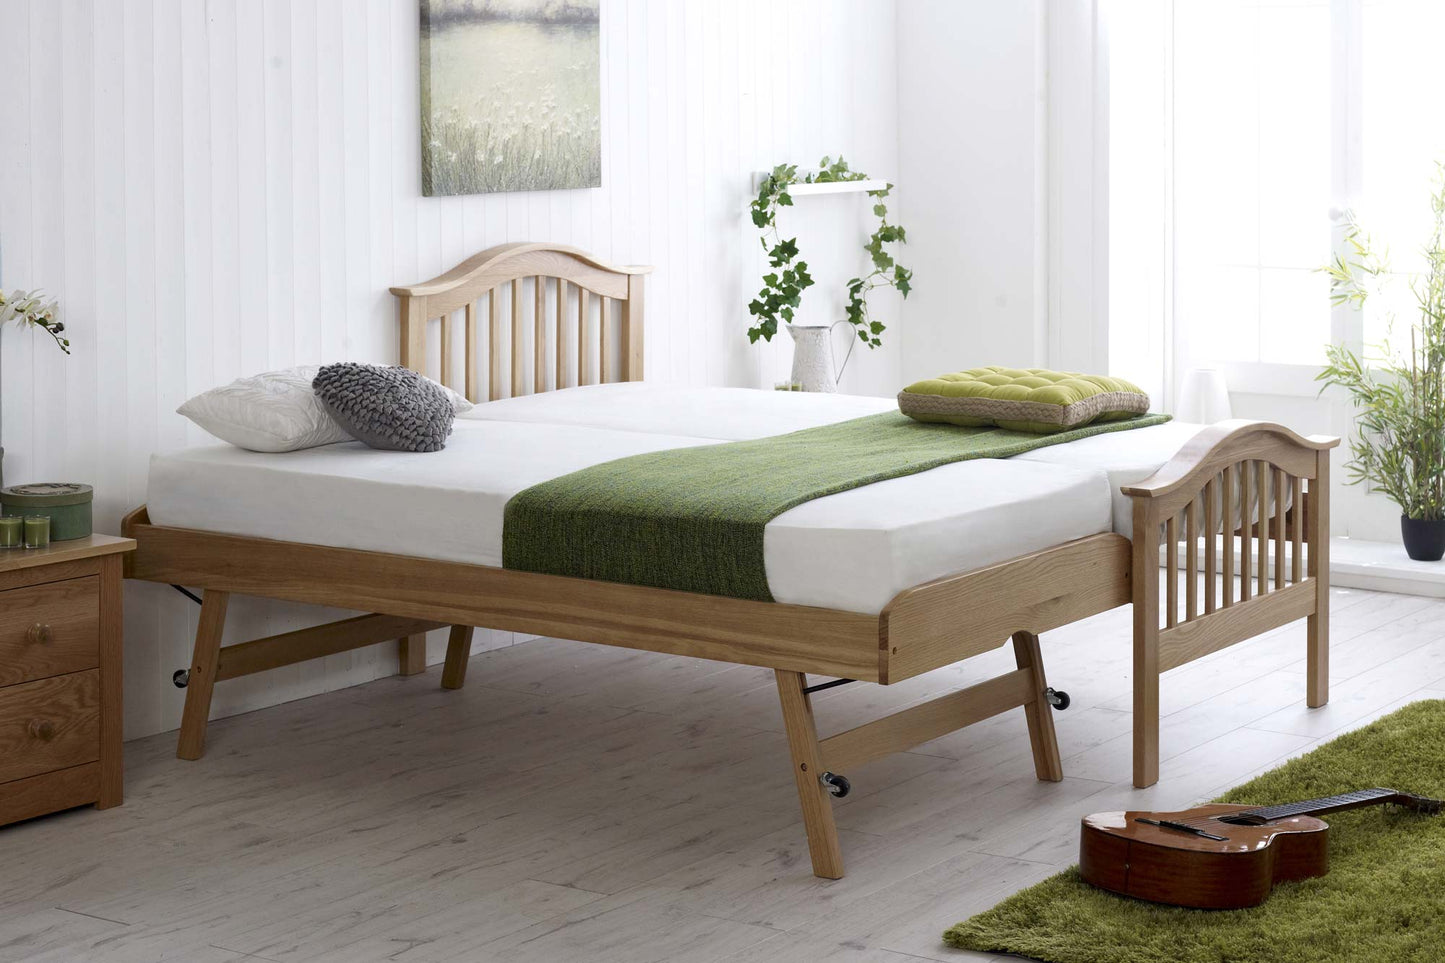 Chilstead Guest Bed - 3ft Single - Natural Oak